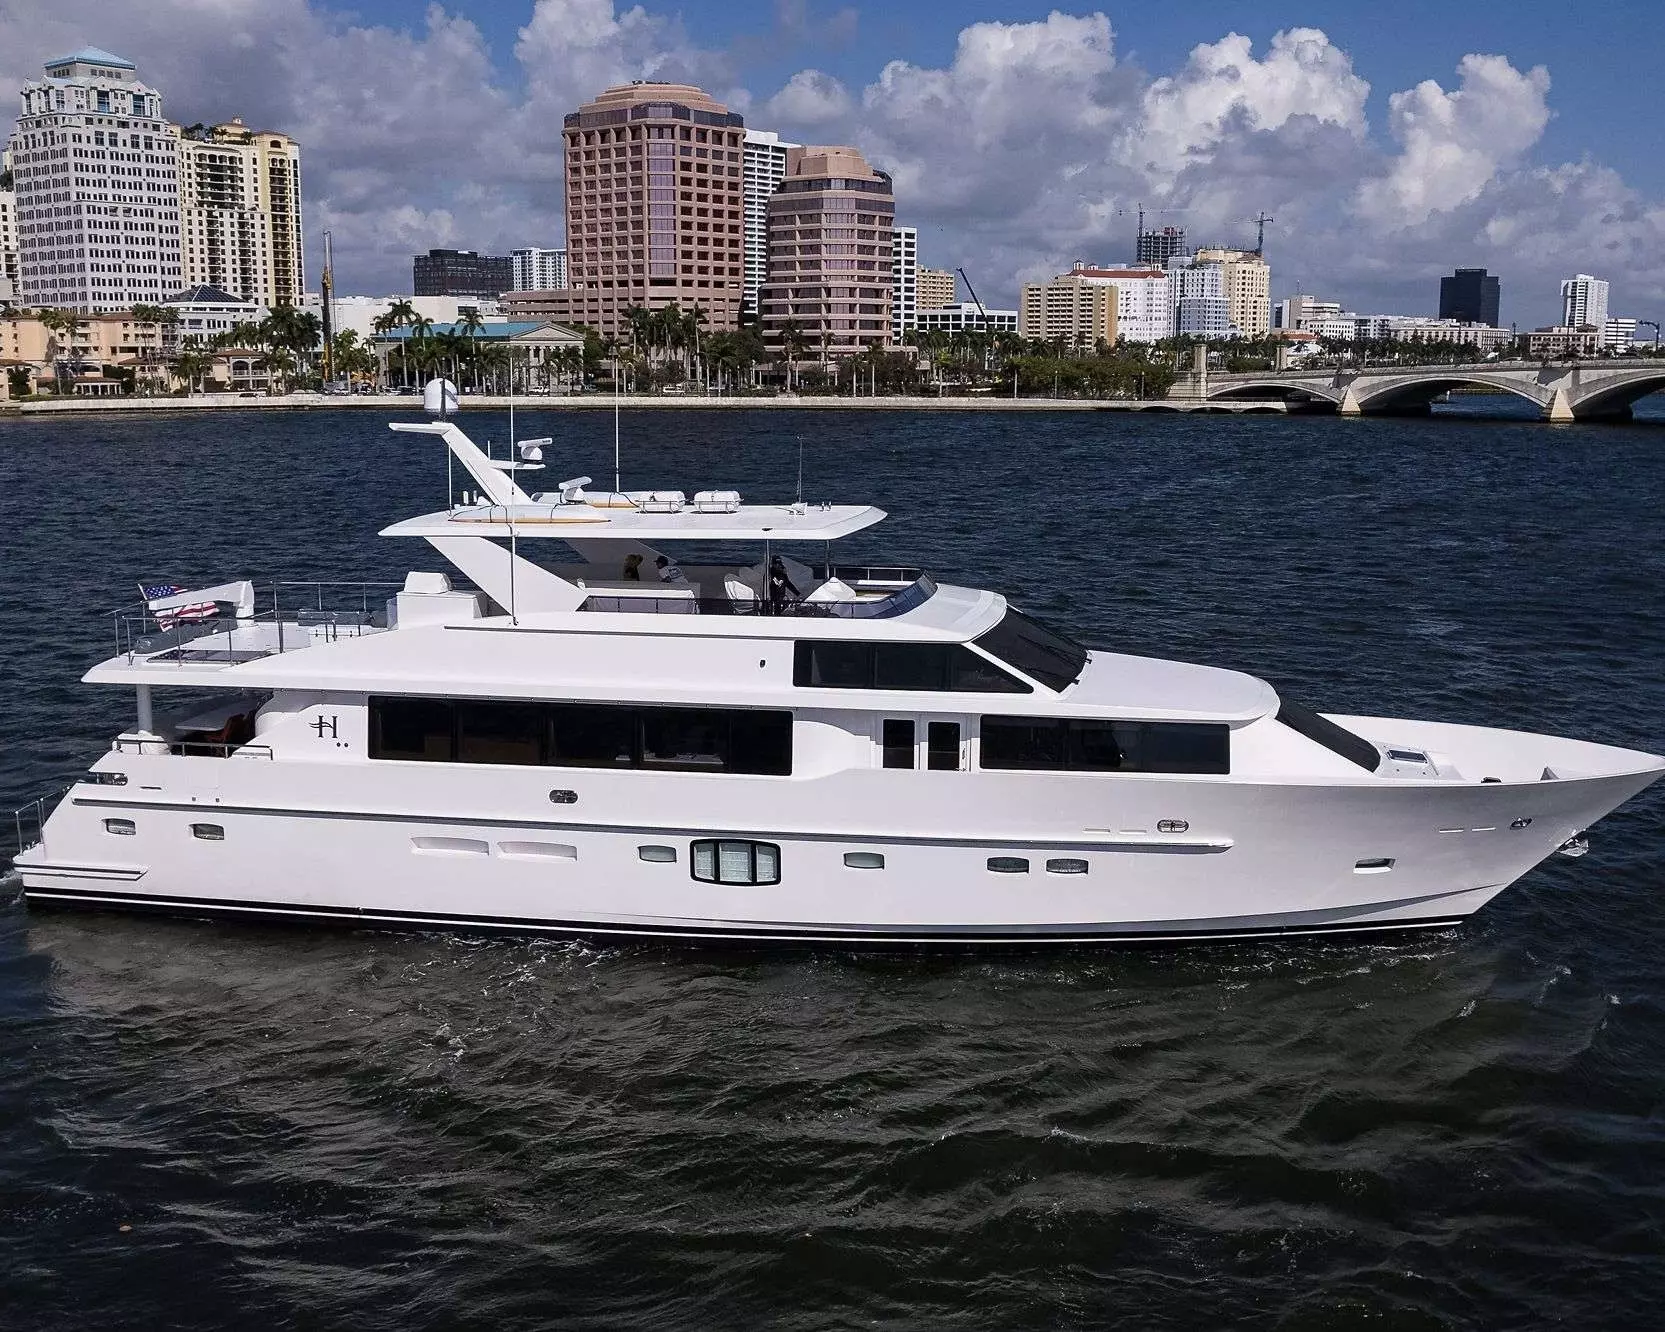 Risk Taker by Hargrave - Top rates for a Charter of a private Superyacht in Turks and Caicos